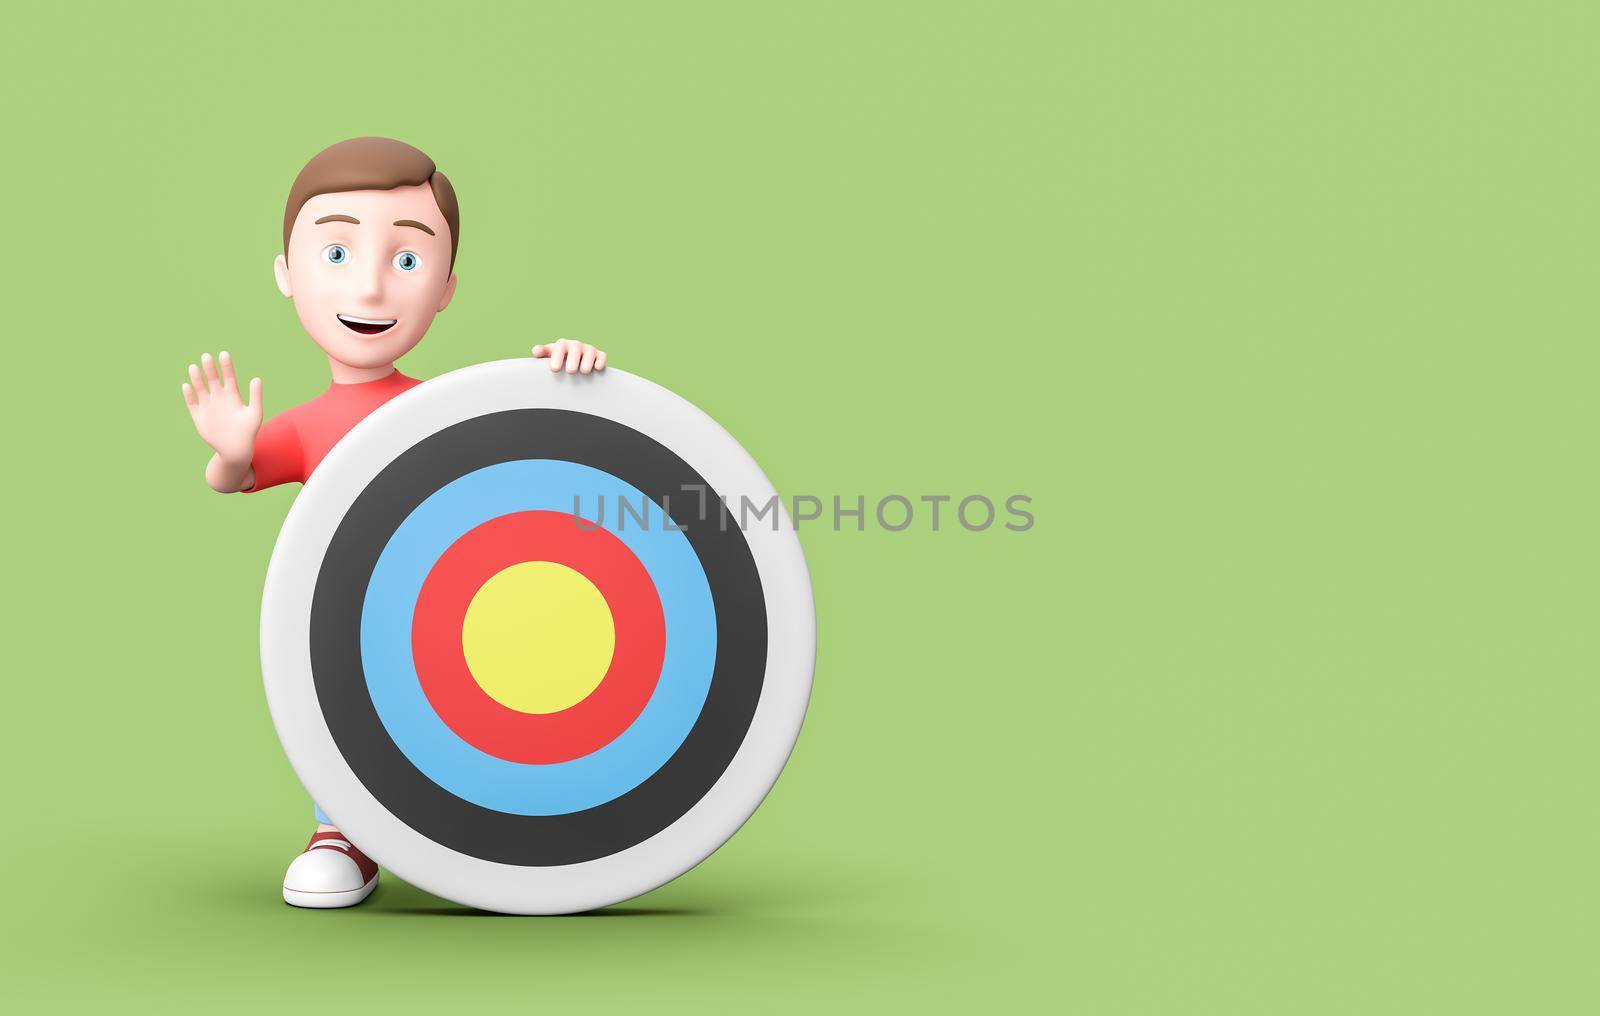 Happy Young Kid 3D Cartoon Character with Arrow Target on Green Background with Copy Space 3D Illustration